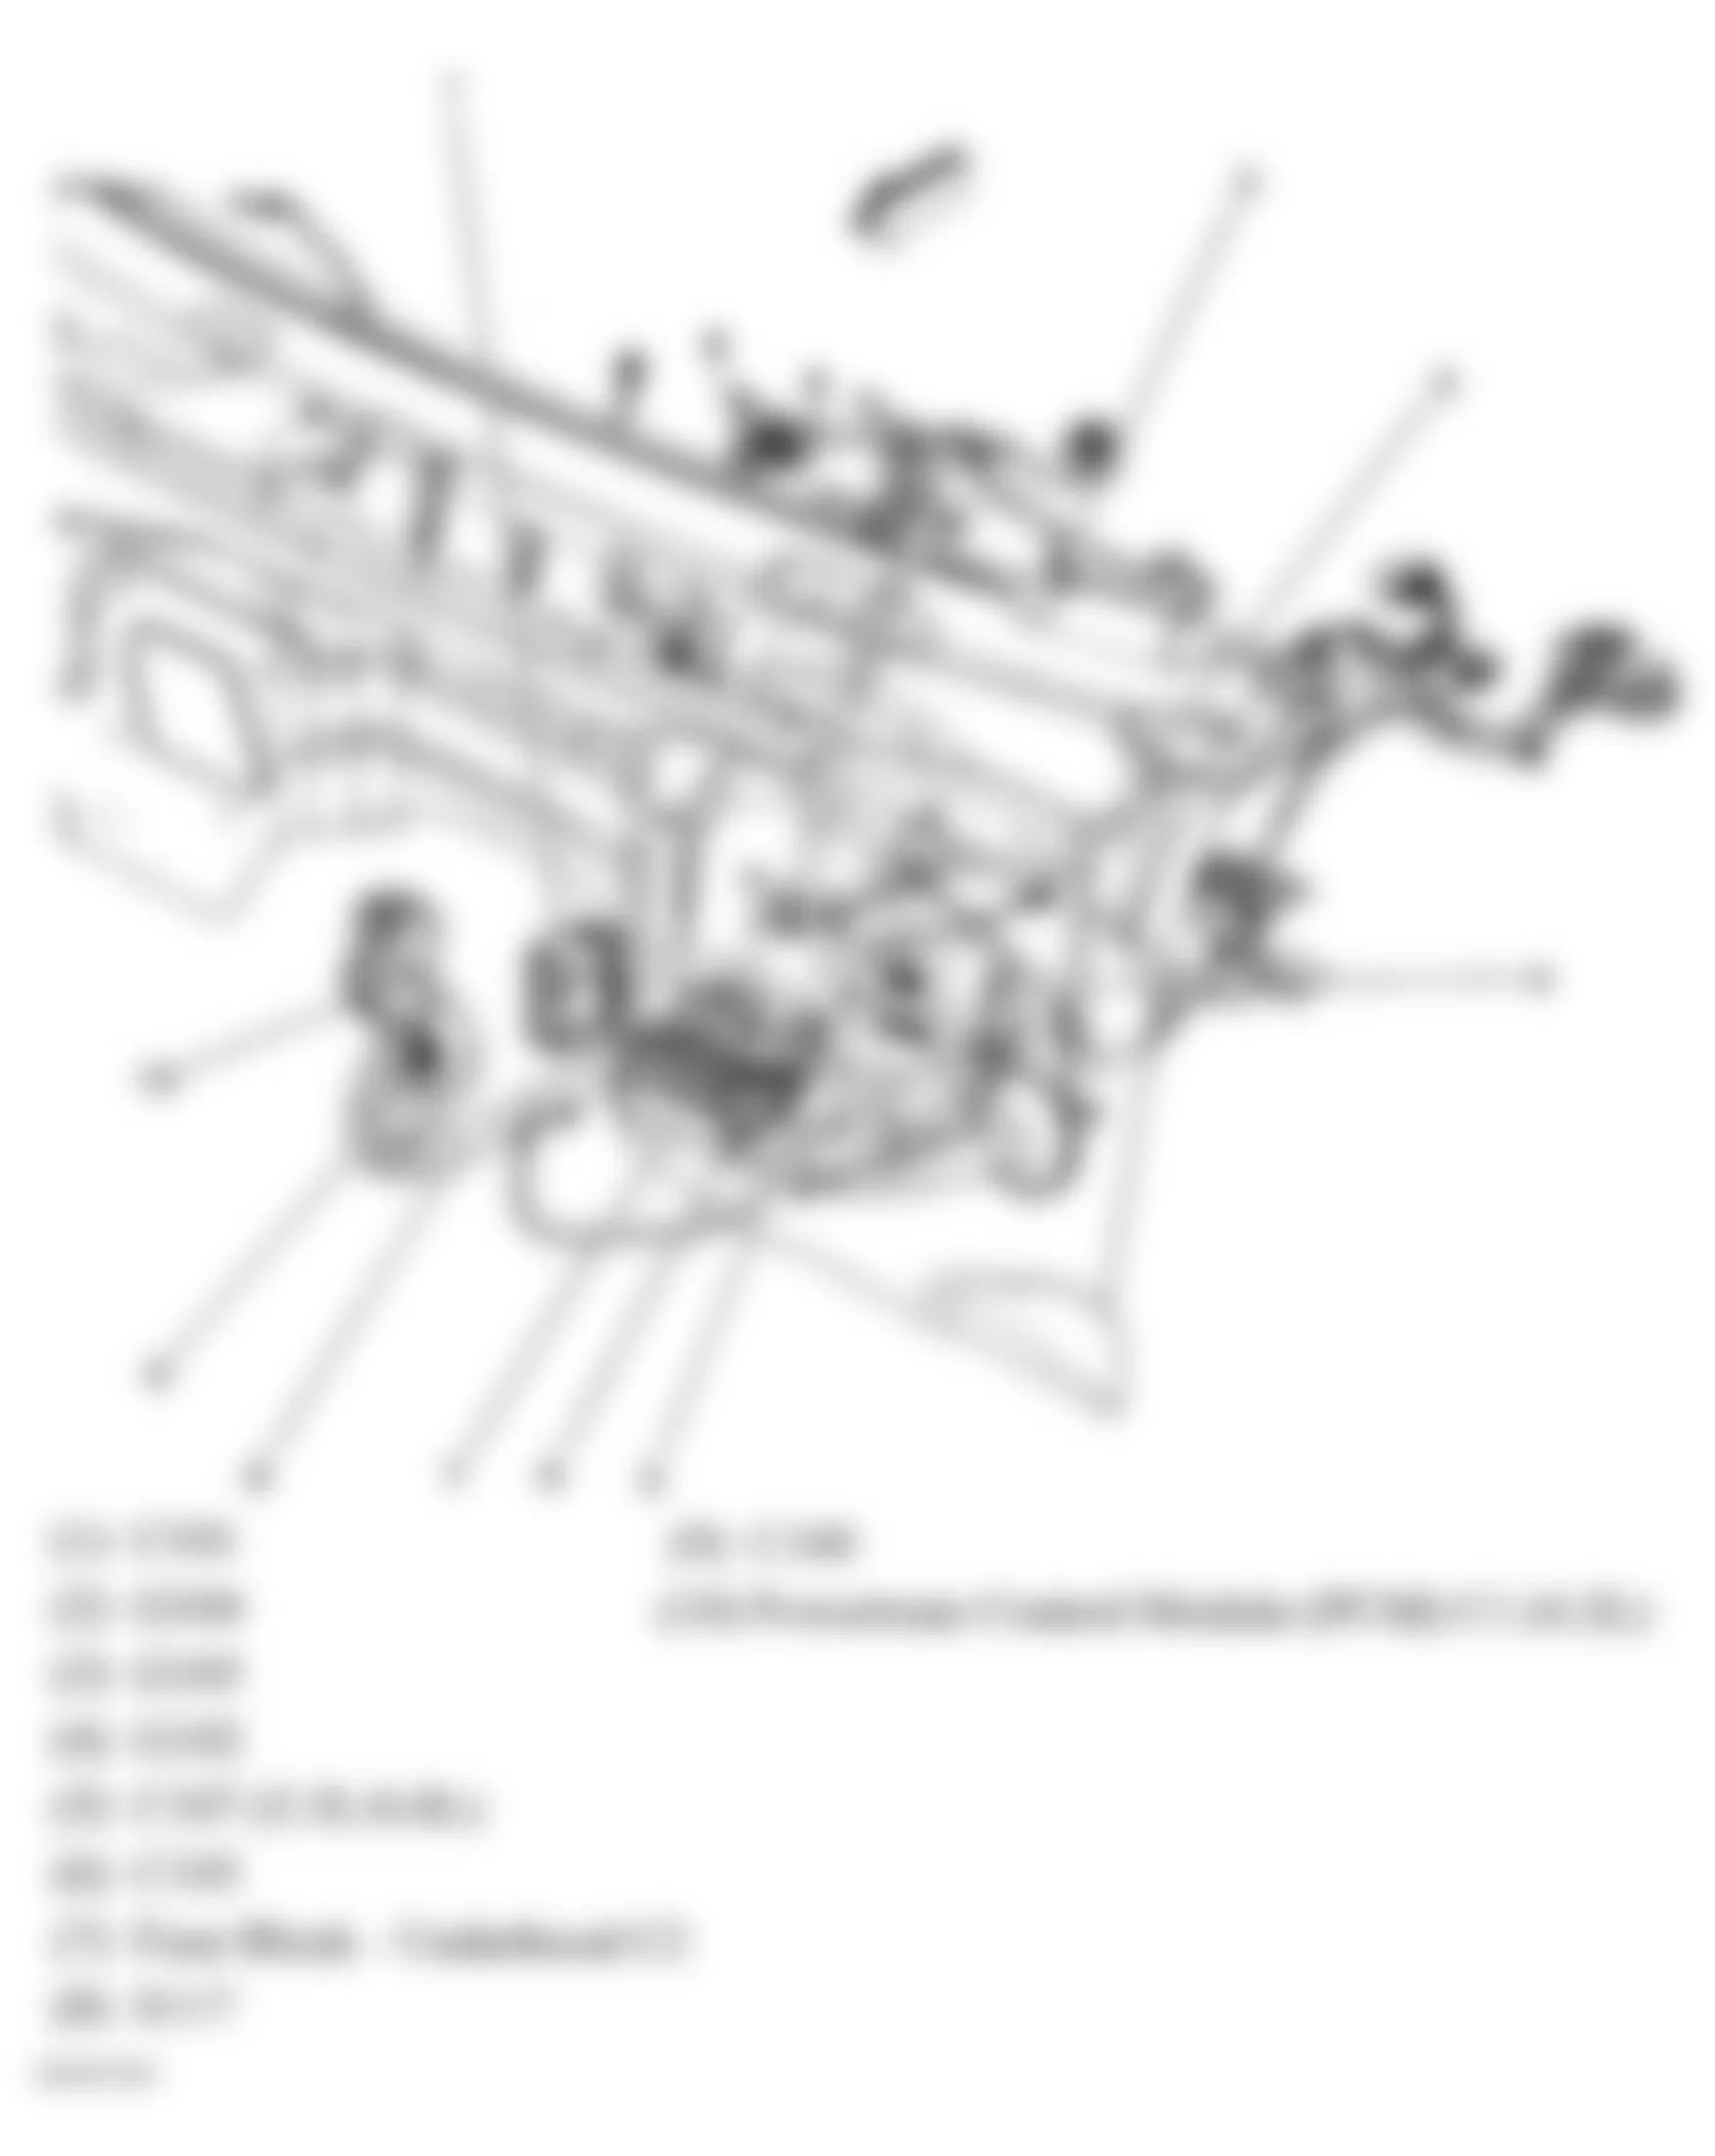 GMC Envoy 2007 - Component Locations -  Rear Of Engine Compartment